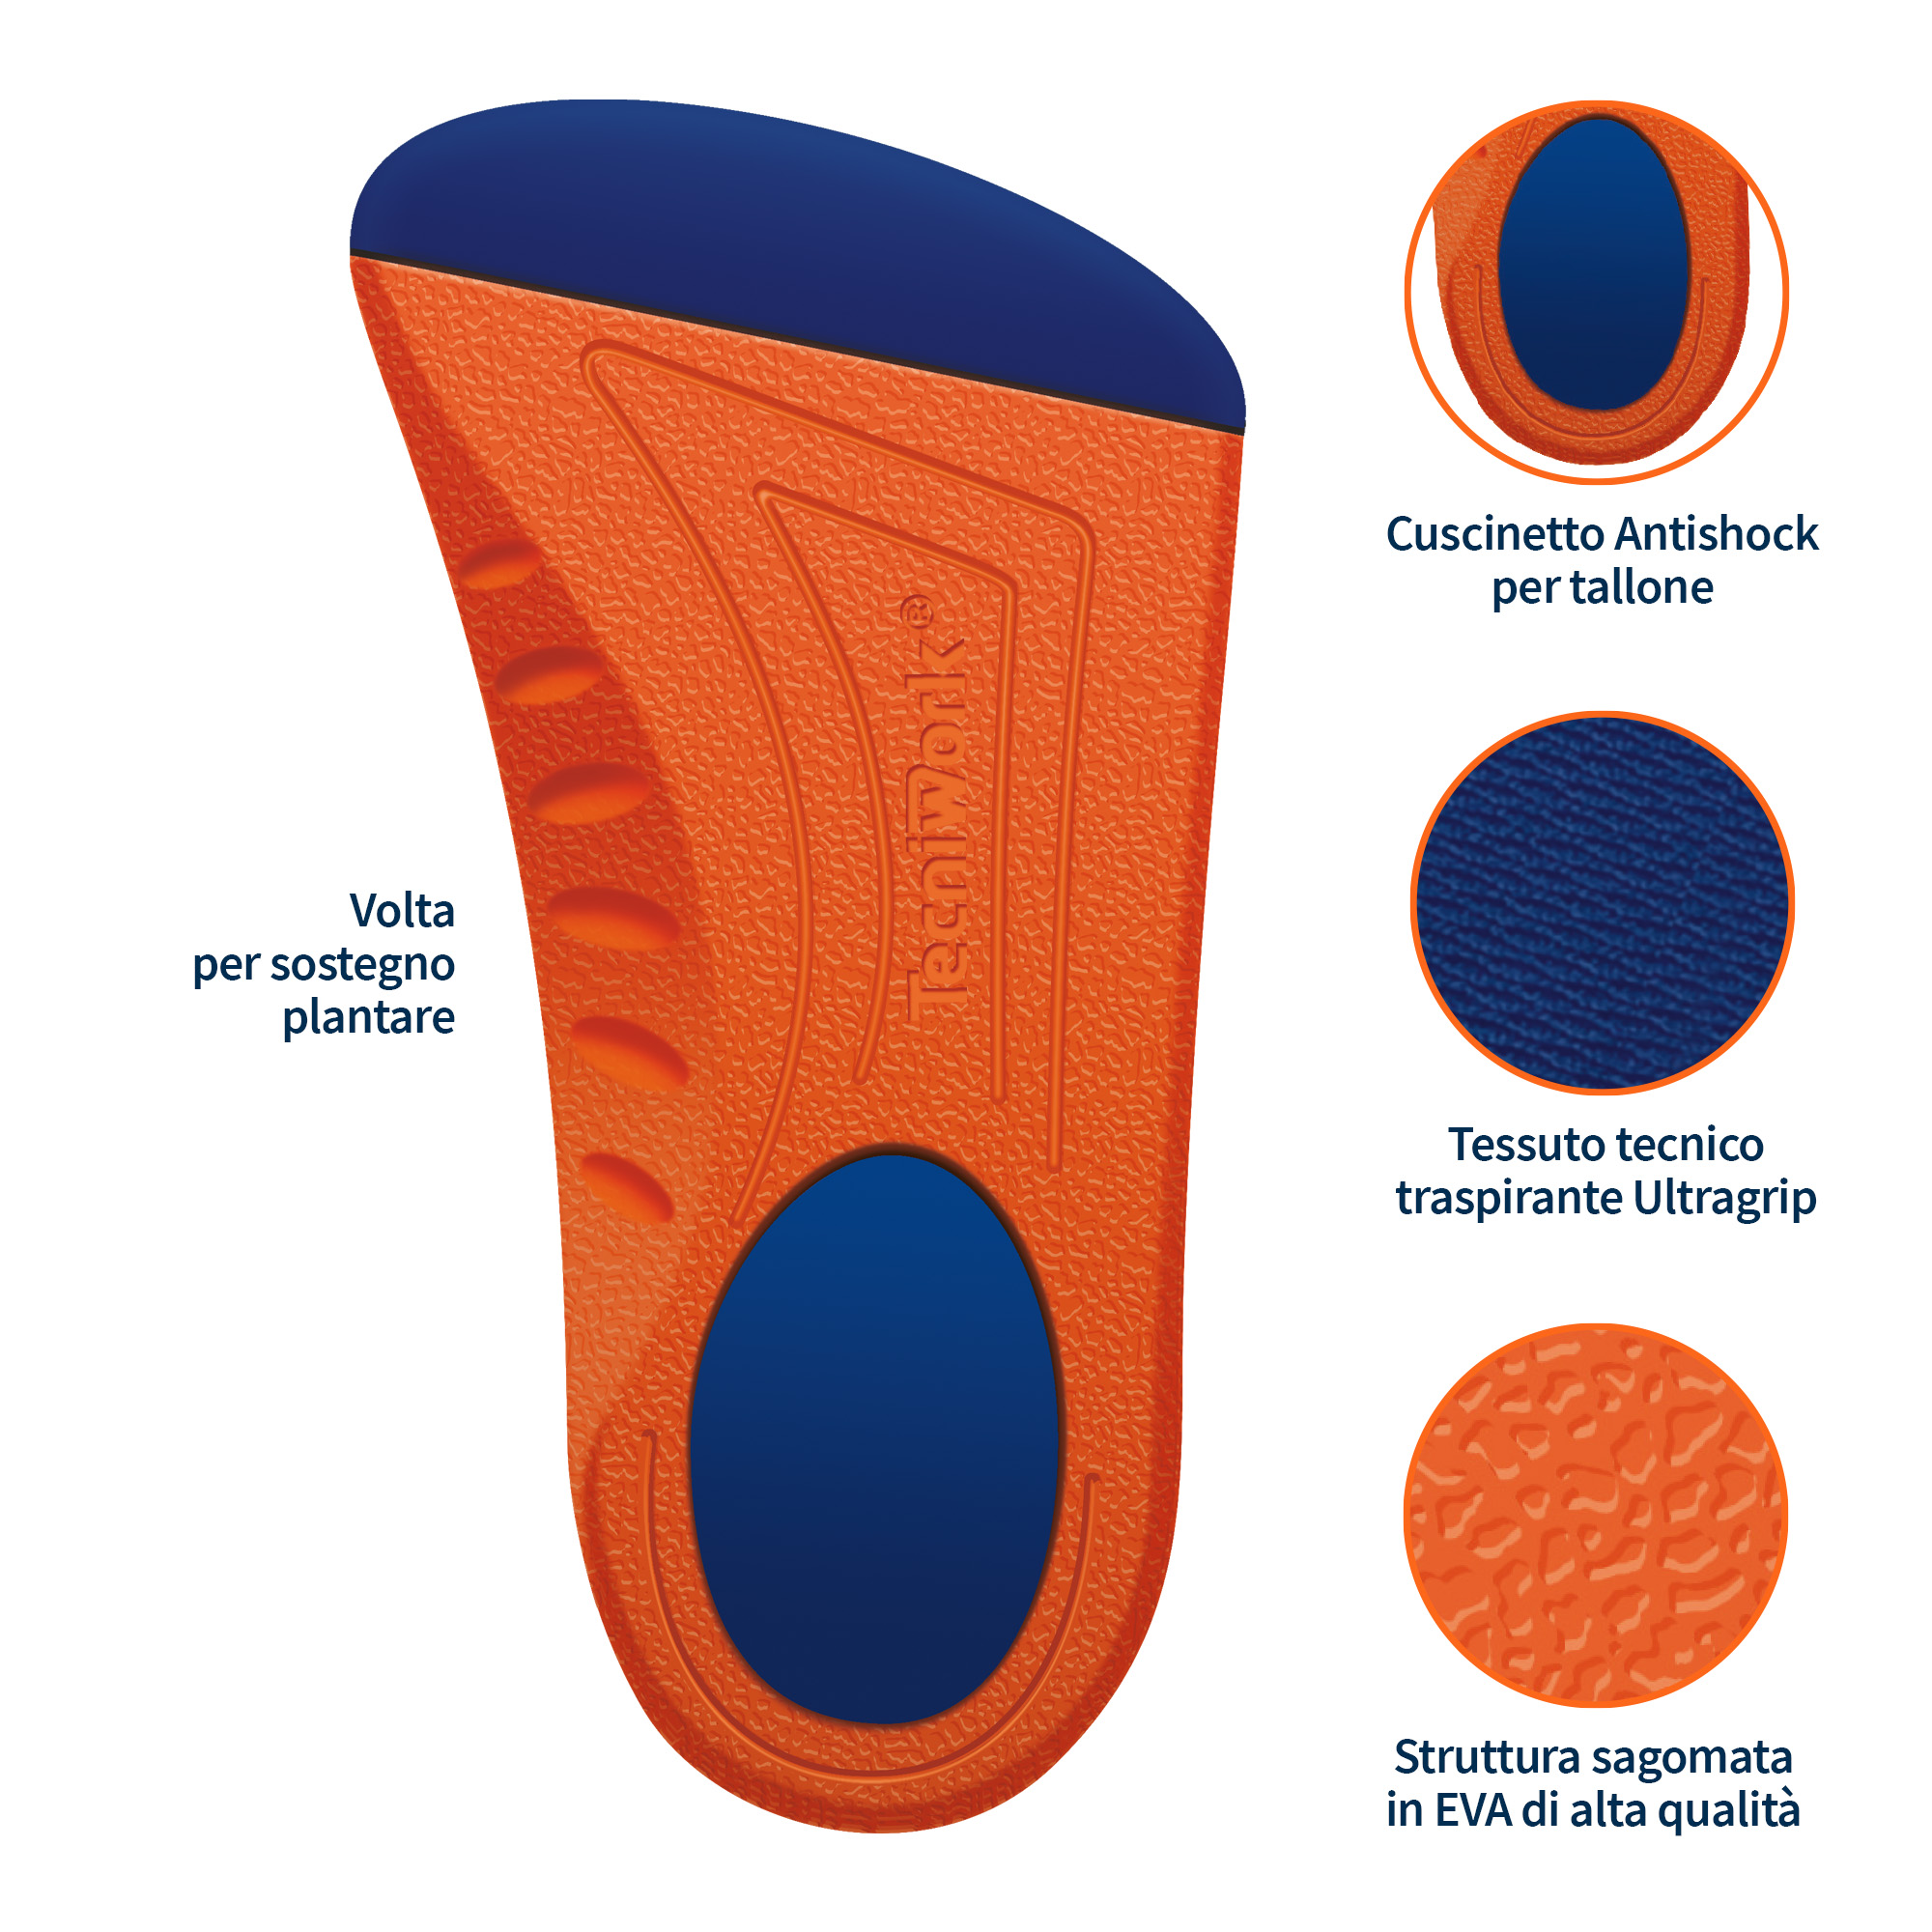 ¾ Semiflex insoles without insert